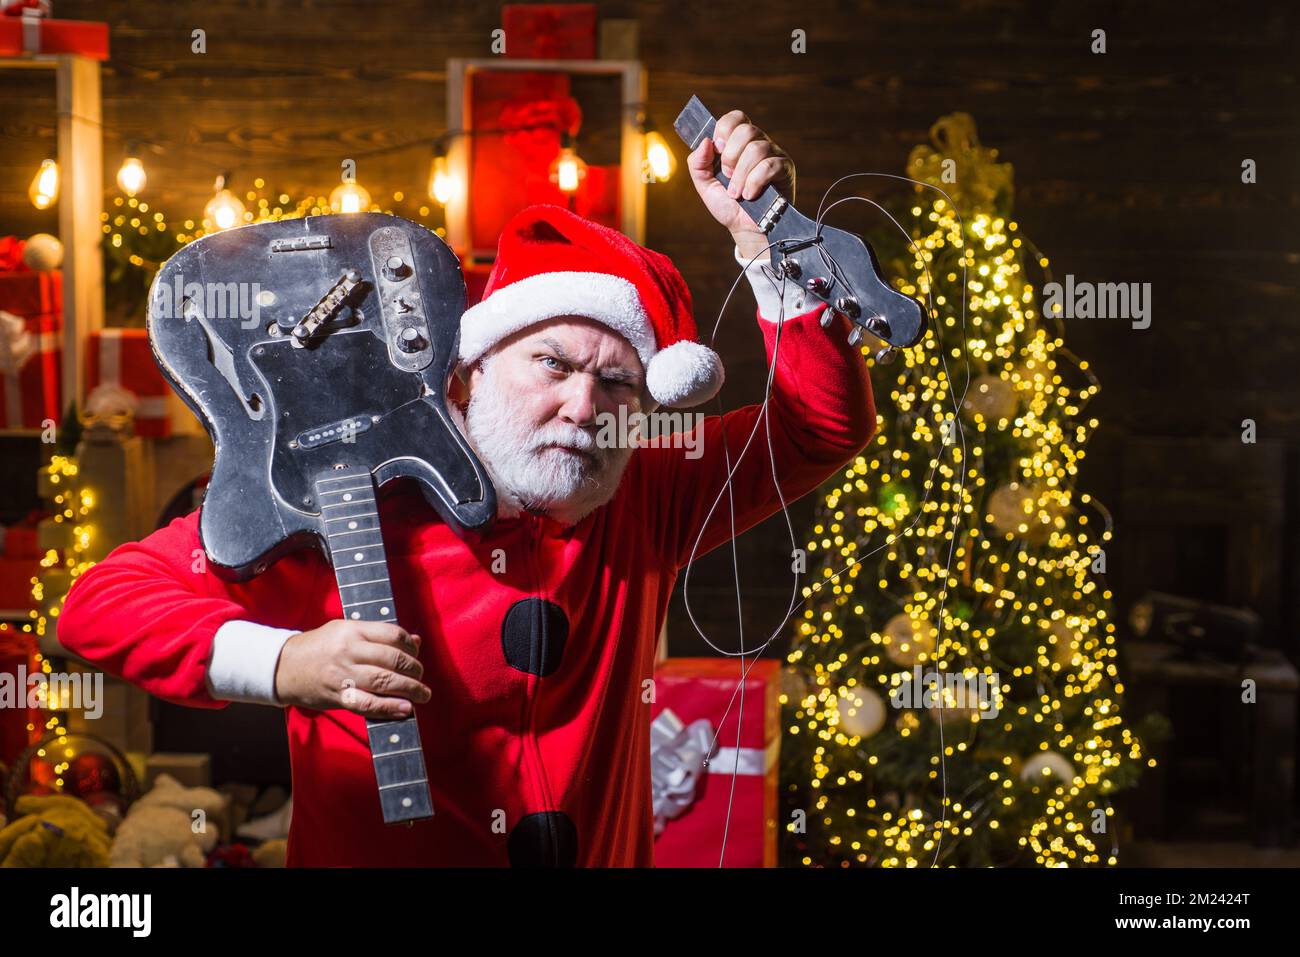 Merry Christmas. New Year party. Bearded Santa Claus rock musician with broken electric guitar. Stock Photo